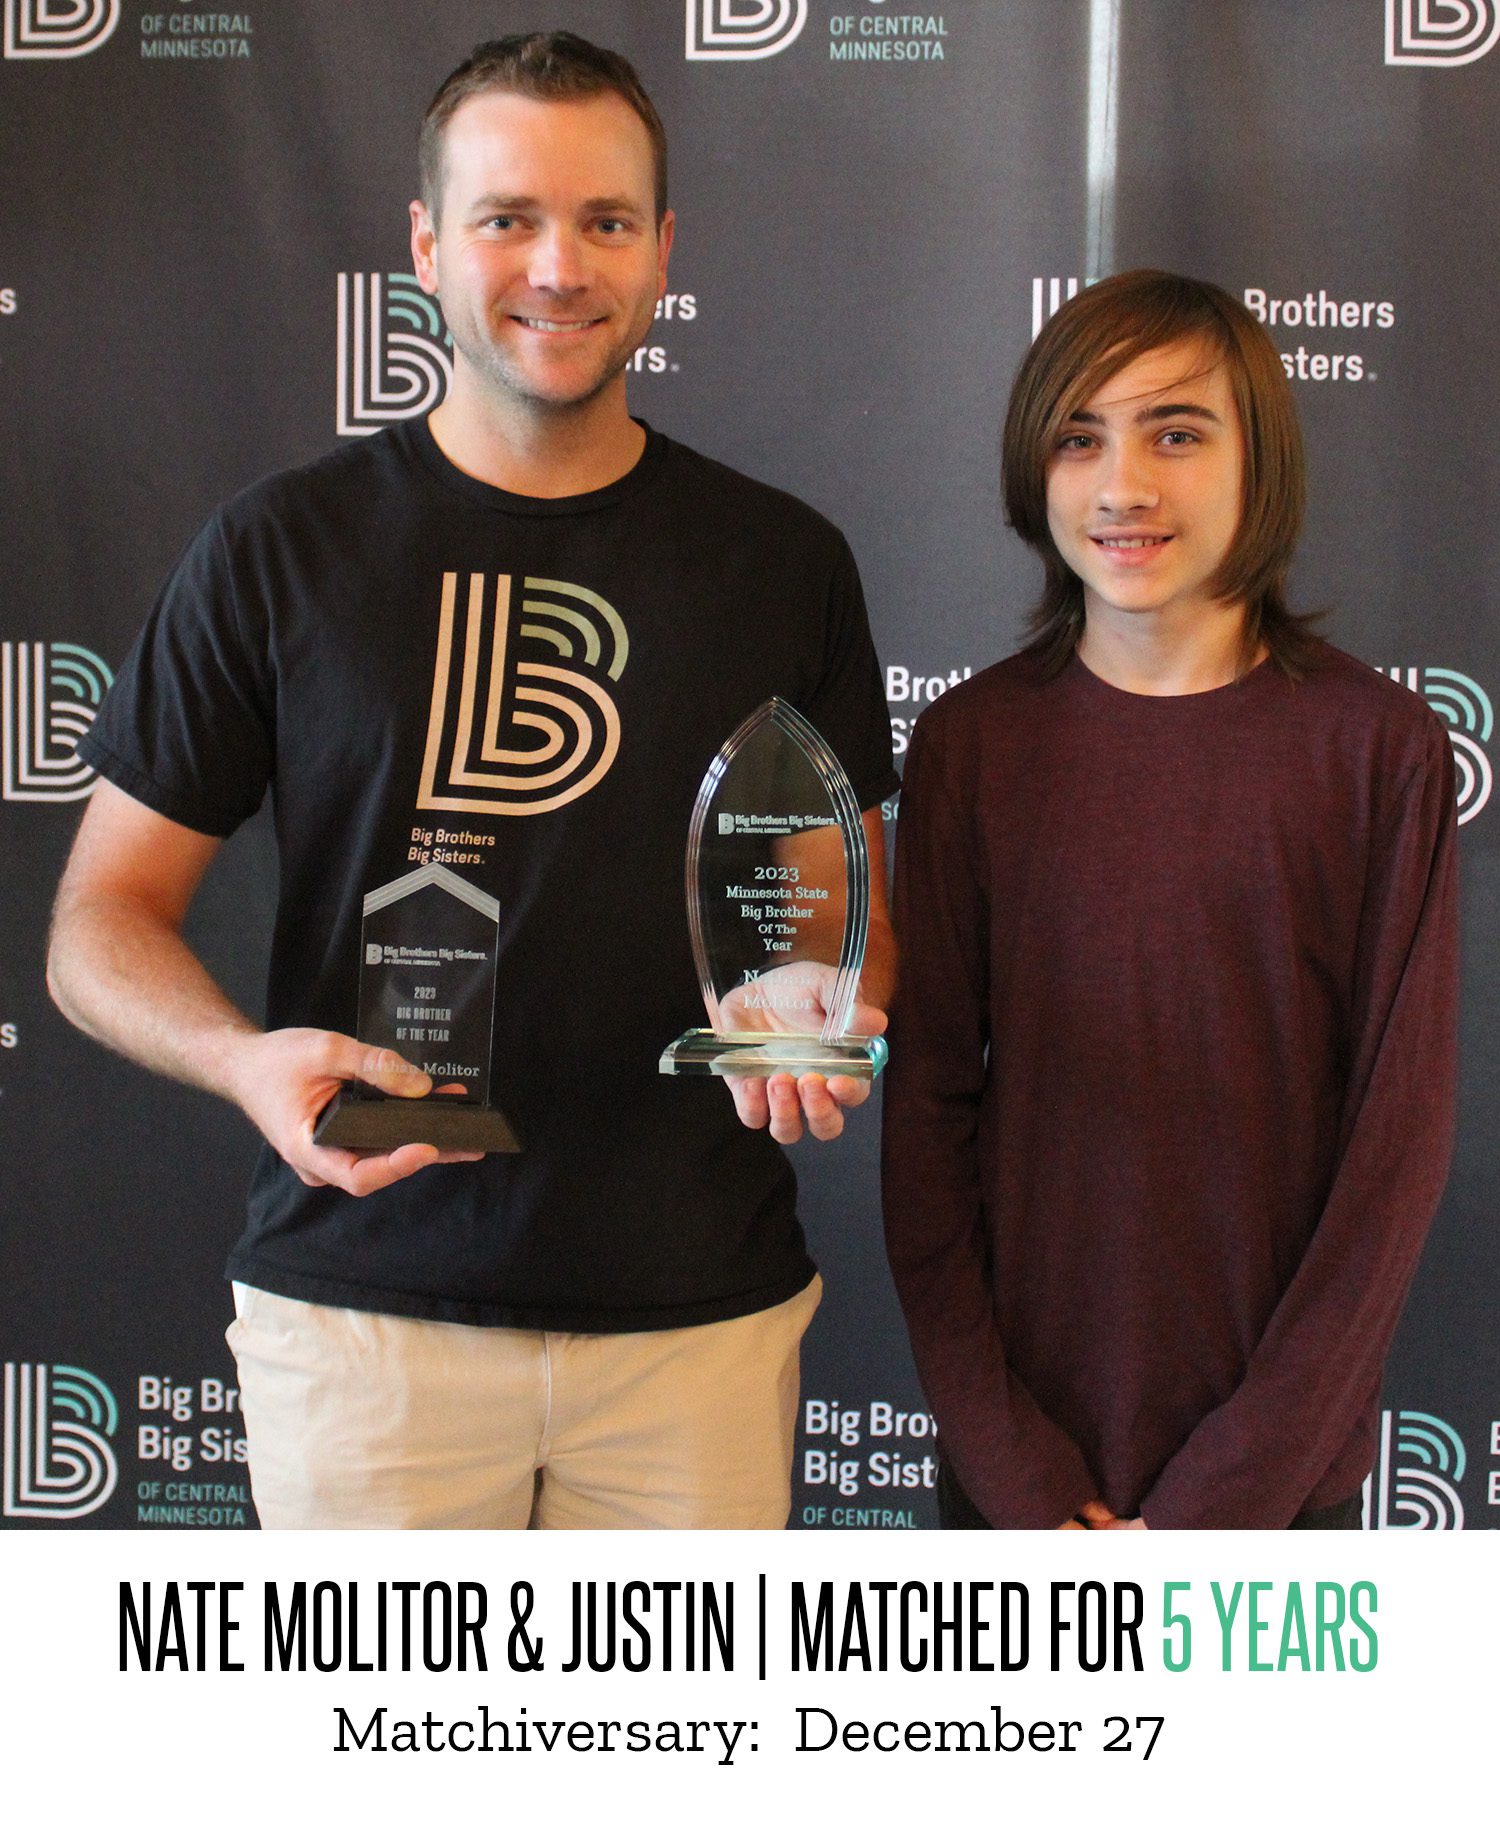 Nate Molitor and Justin pose for a picture after being matched for five years